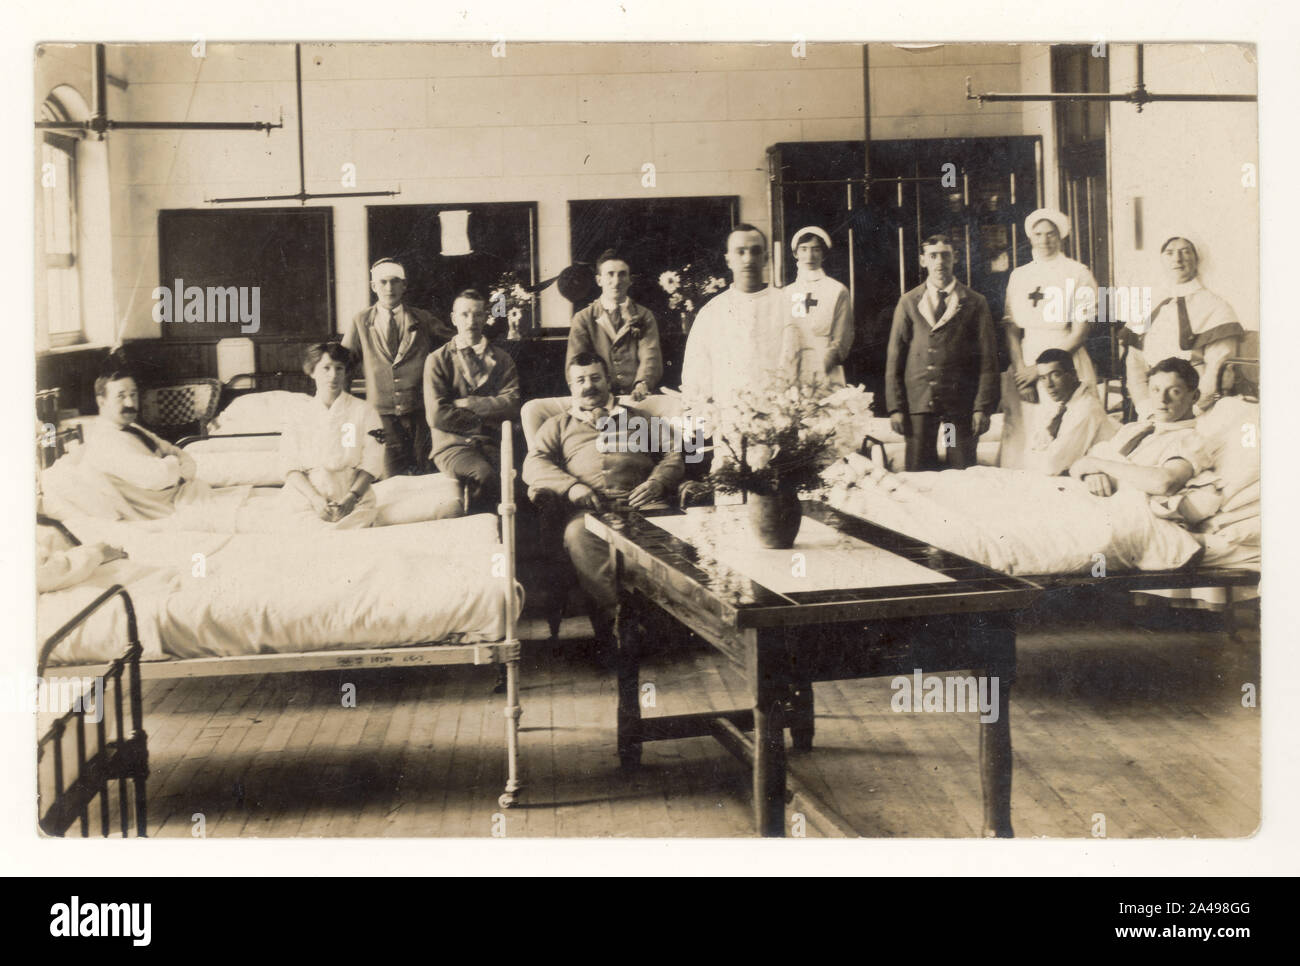 WW1 era hospital ward with recovering British army soldiers, possibly auxiliary hospital for non life threatening injuries, cared for by red cross nurses, Voluntary Aid Detachment or VAD's , circa 1915, 1916, U.K. Stock Photo